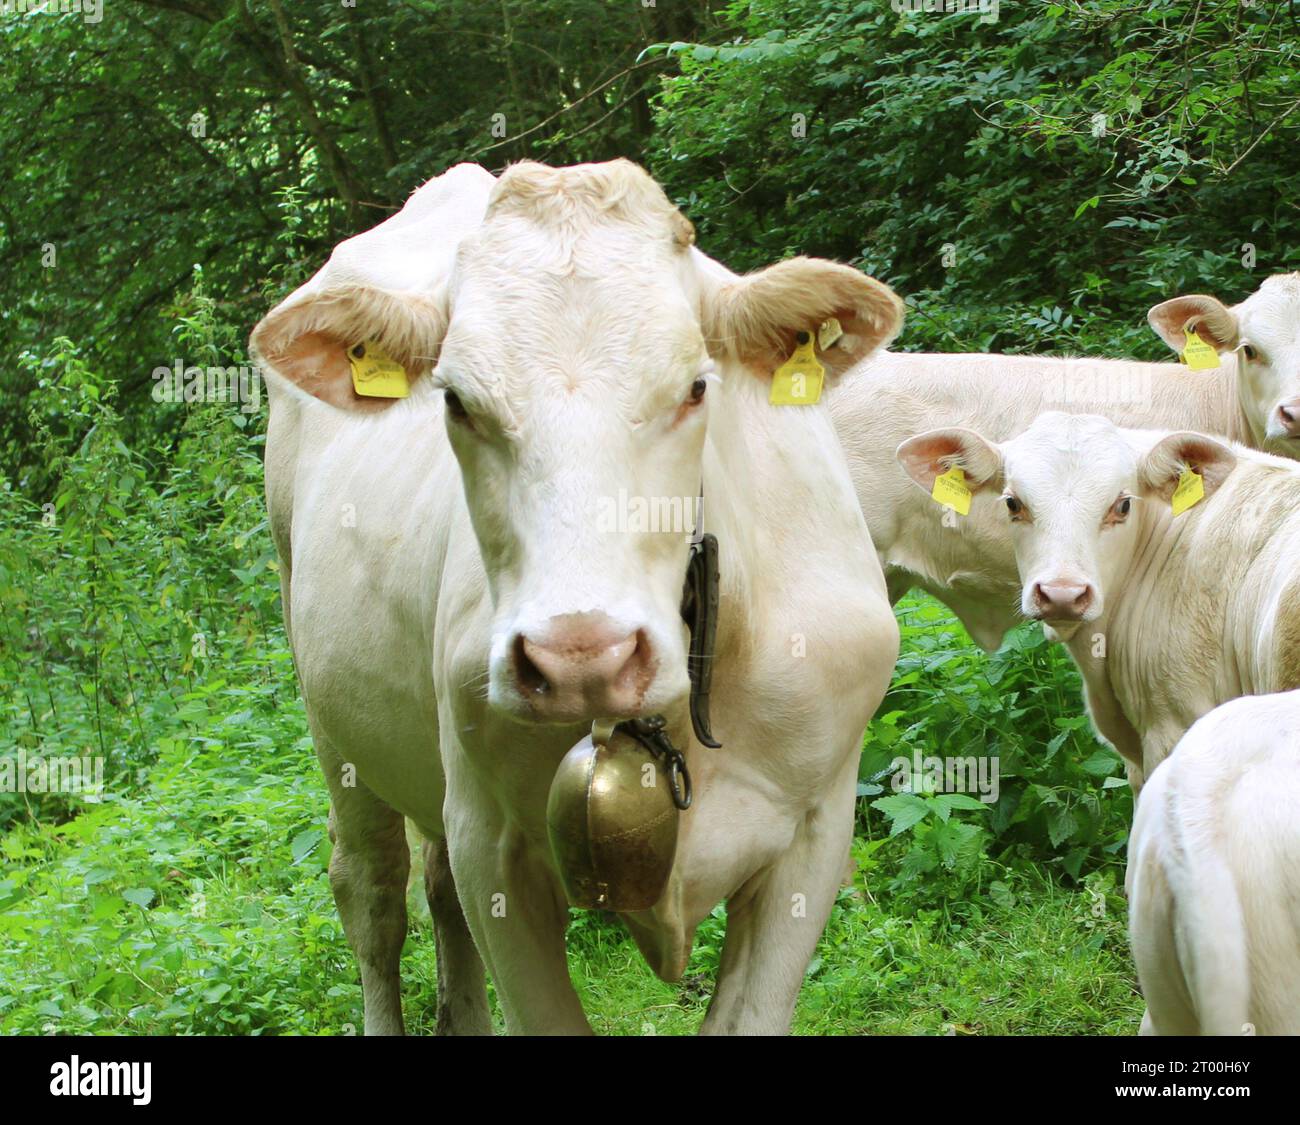 the Kärntner Blondvieh is an austrian rare farm animal breed, blonde almost white-haired cows drink in the green woods creek in austria Stock Photo